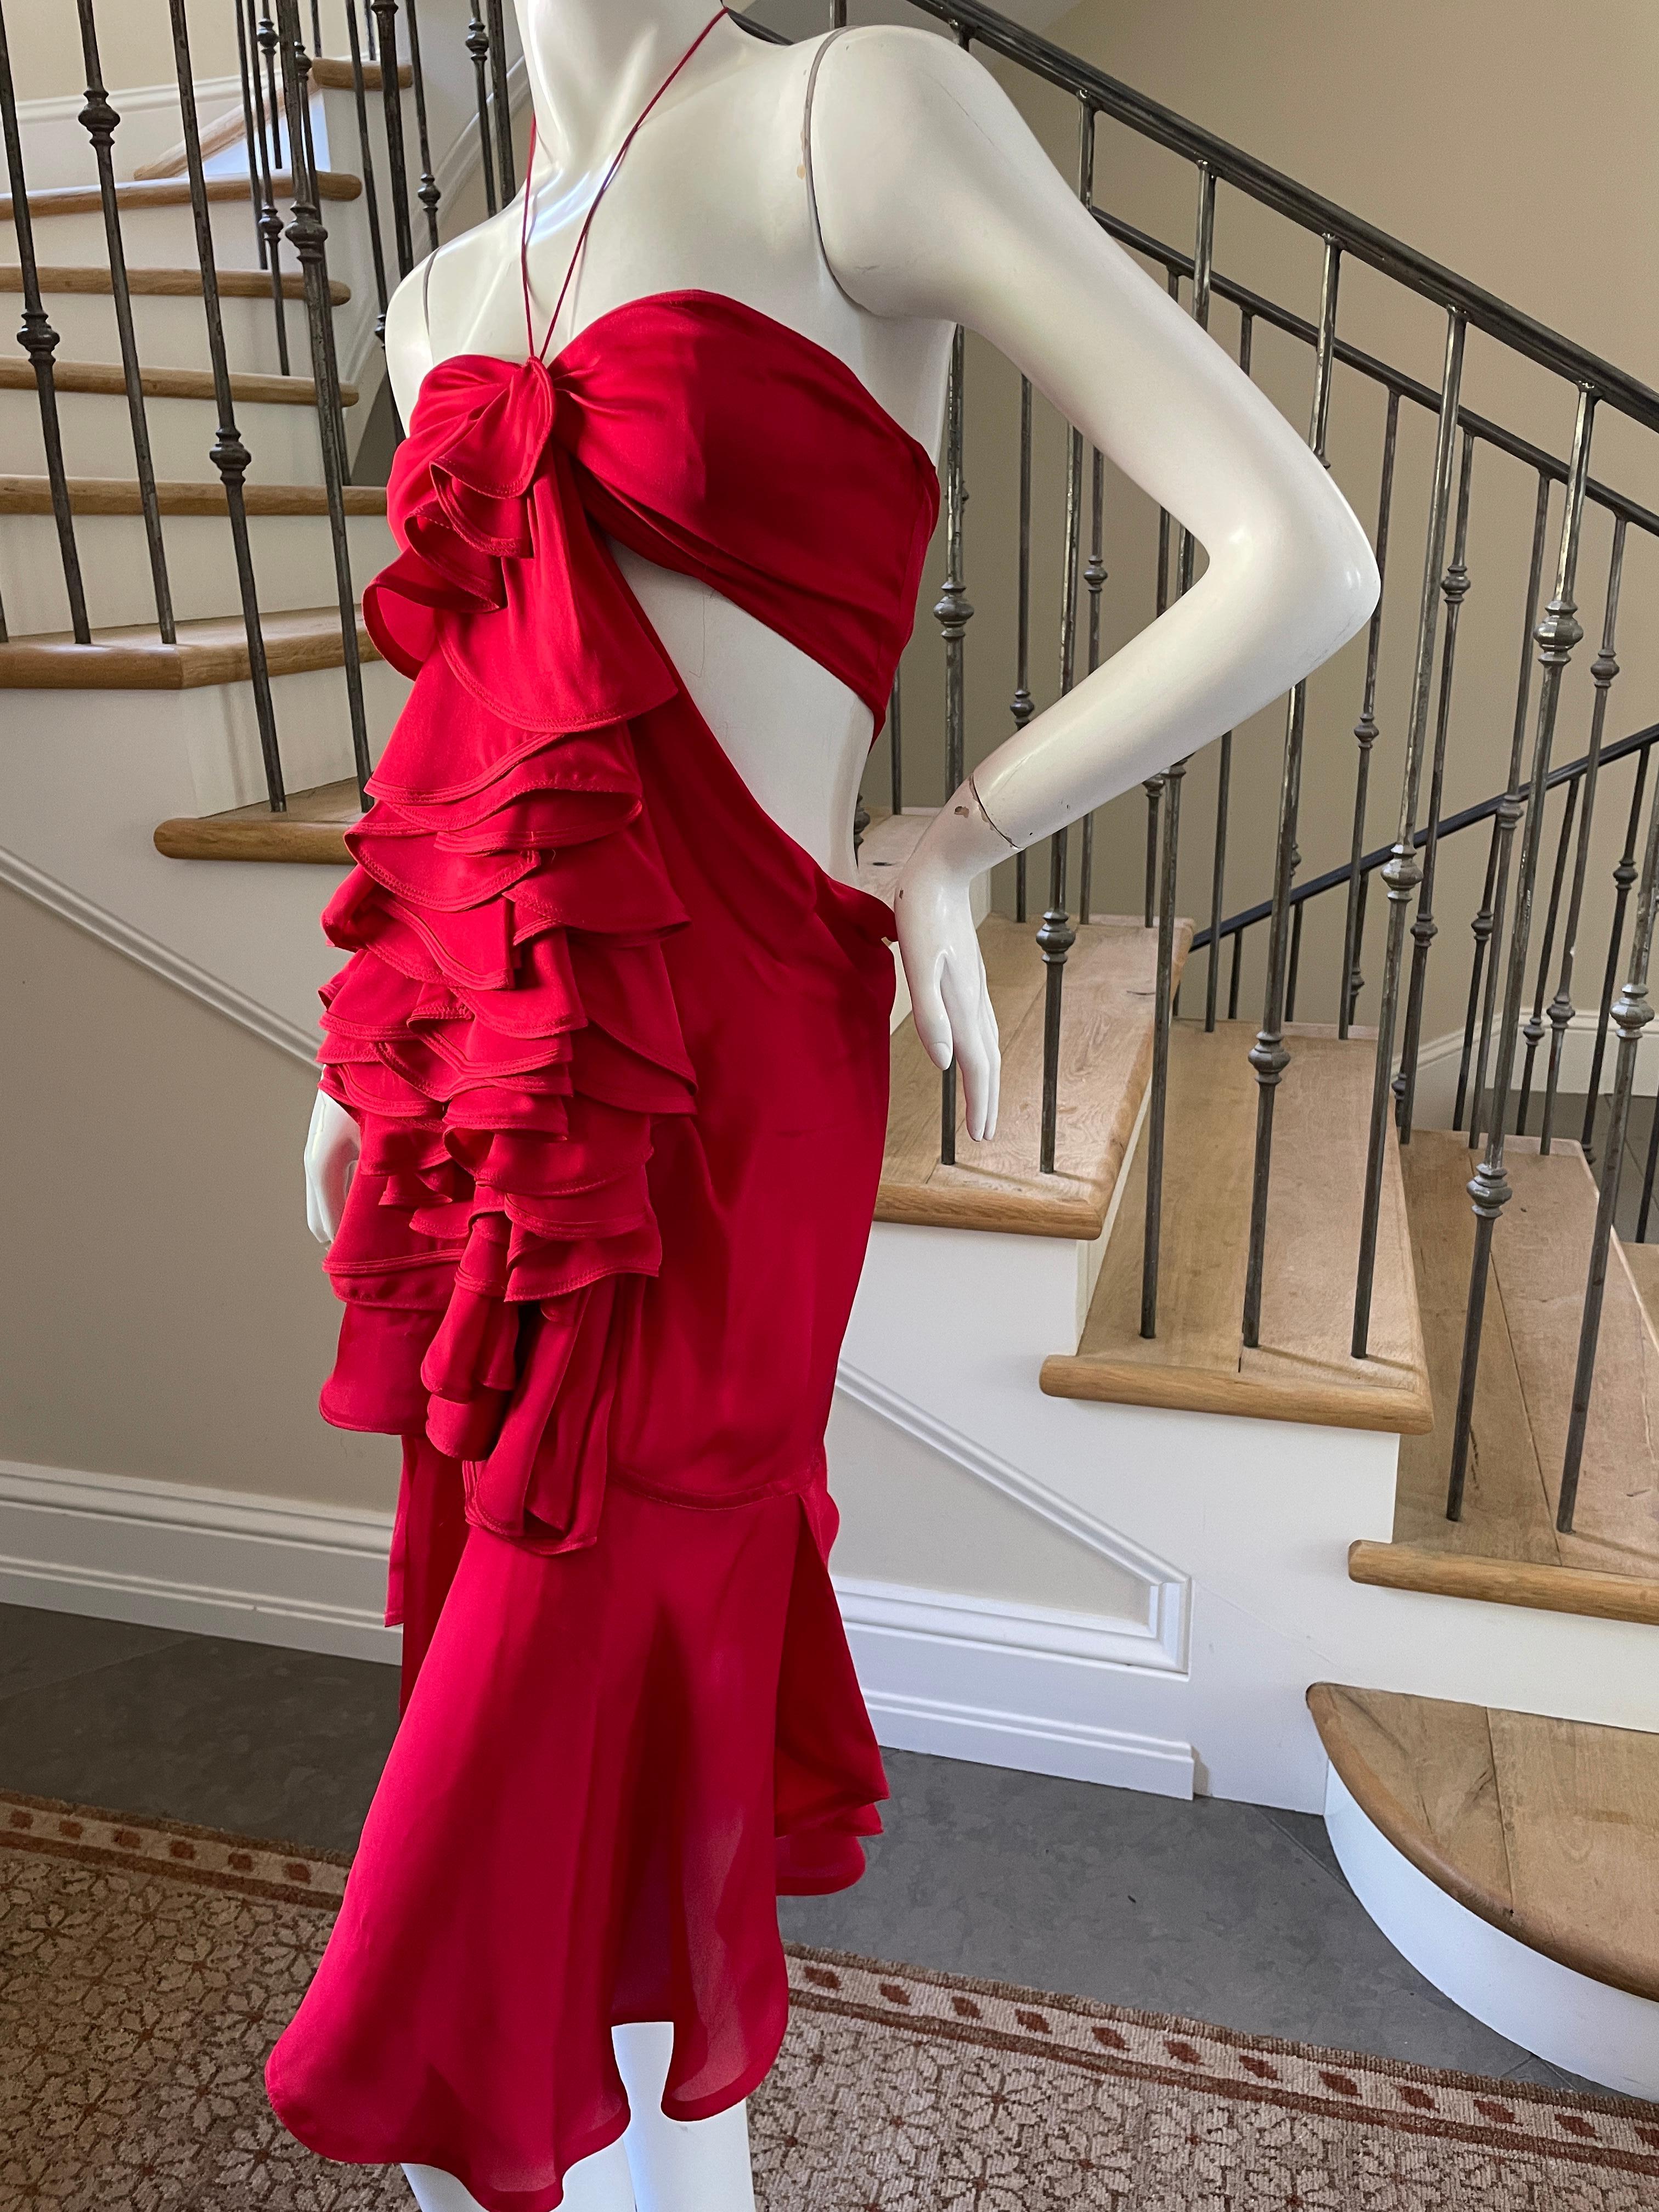 Yves Saint Laurent by Tom Ford 2003 Ruffled Red Silk Dress  For Sale 8